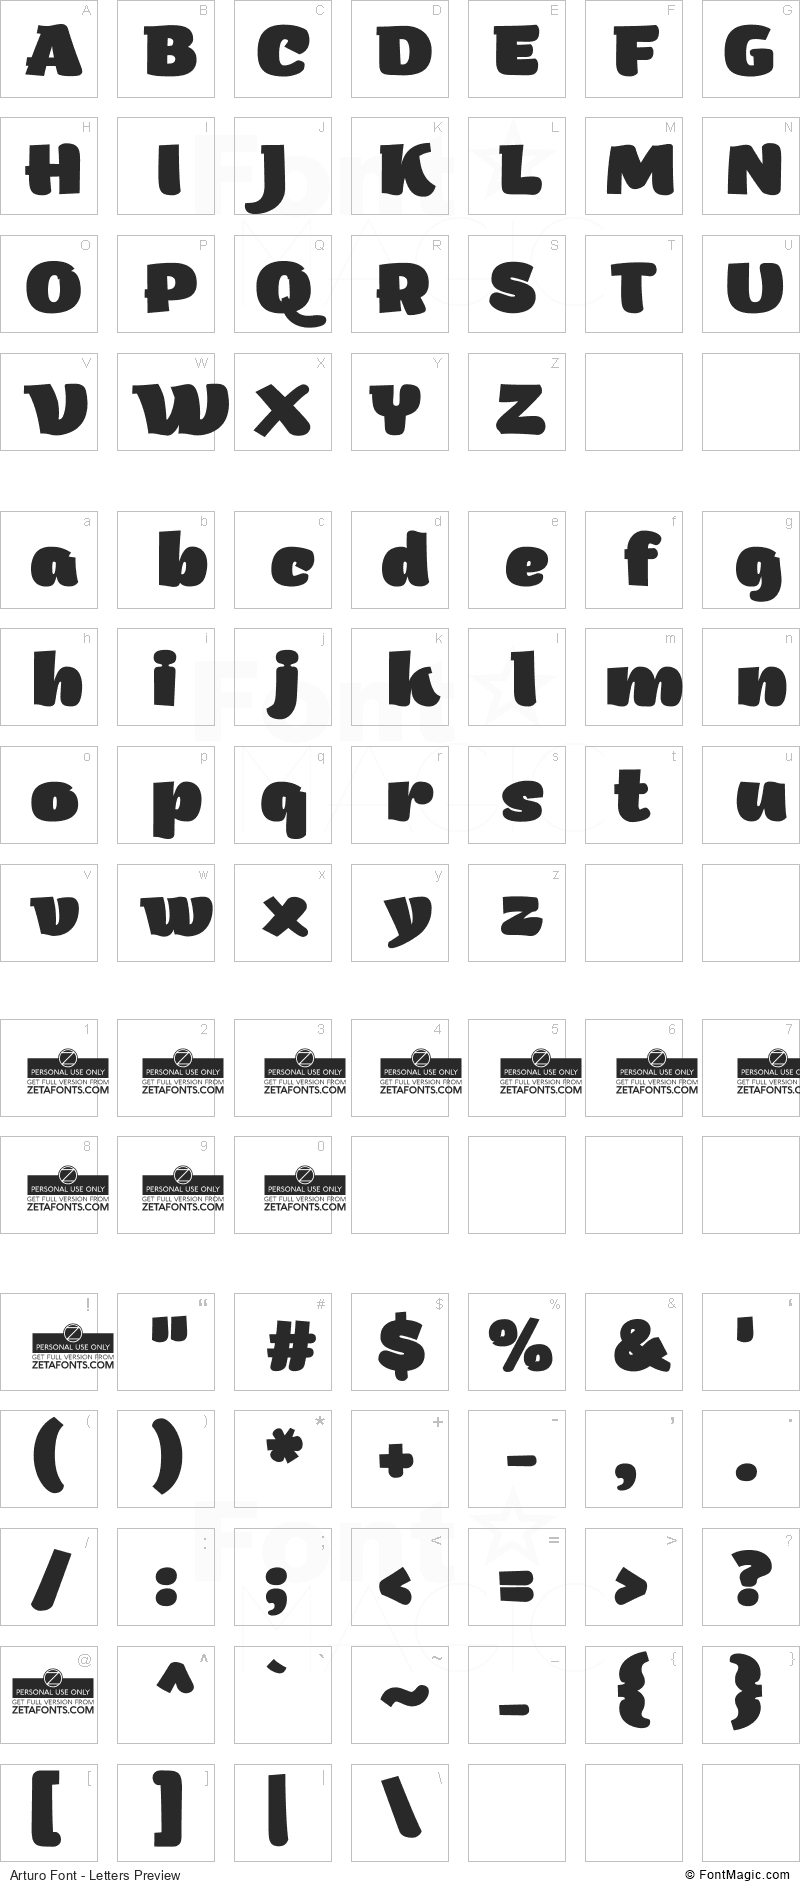 Arturo Font - All Latters Preview Chart